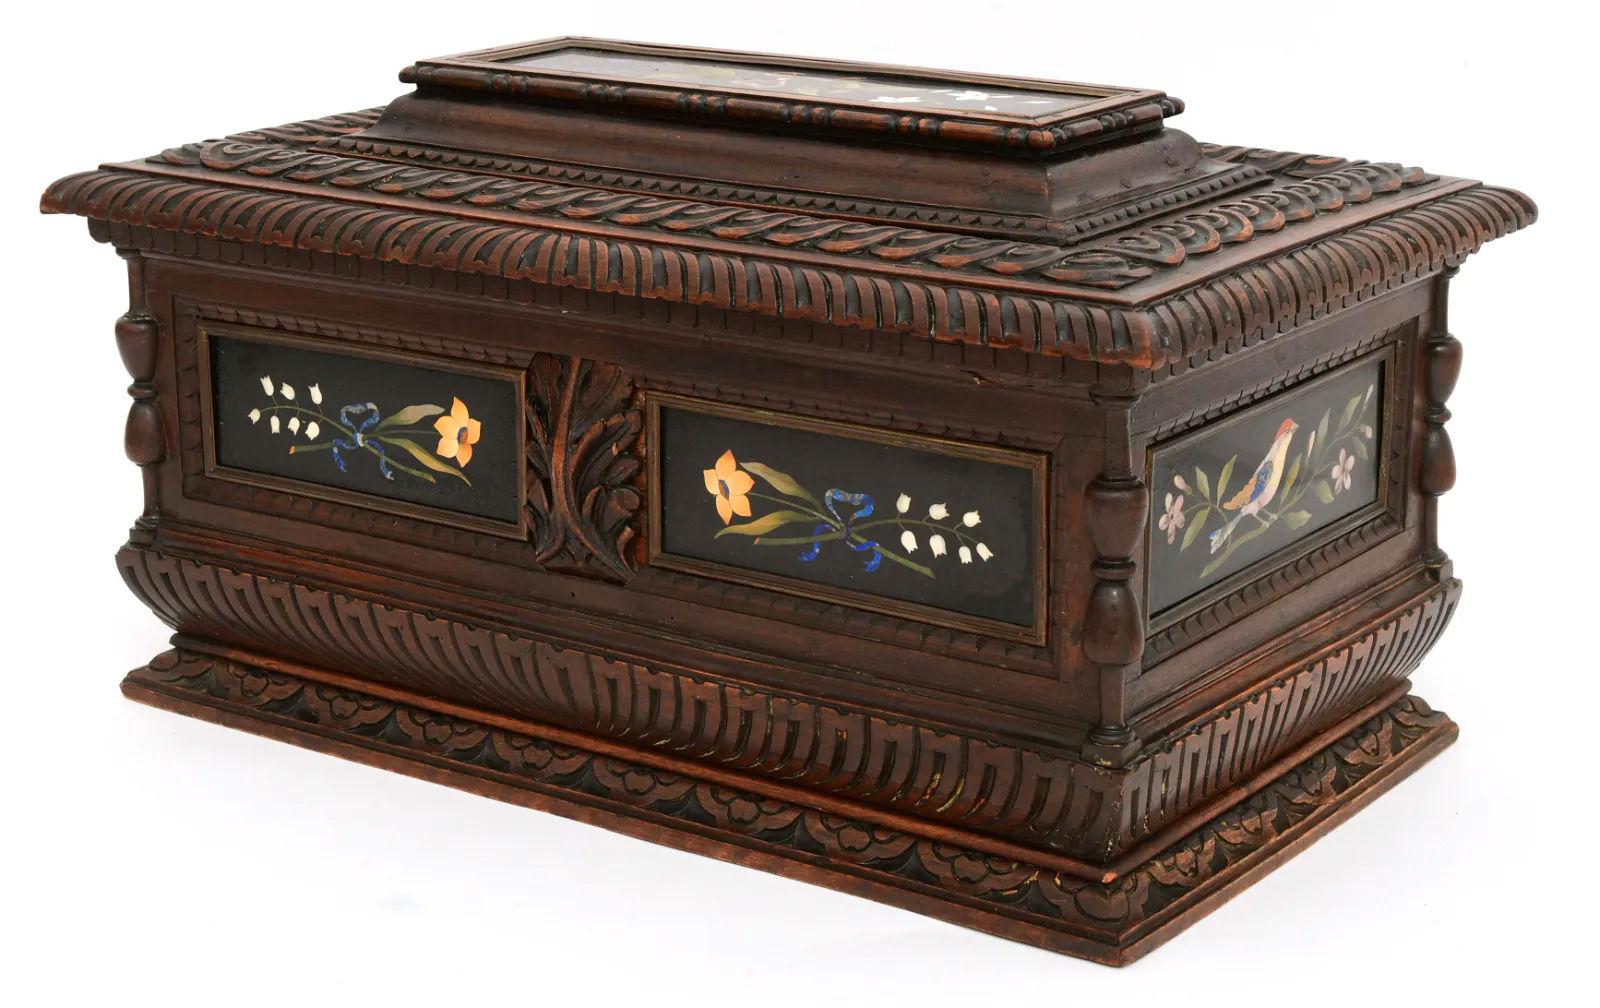 Very large and impressive 19th century Italian Walnut Chest with Pietra Dura Plaques.
The plaques are possibly earlier than the box.